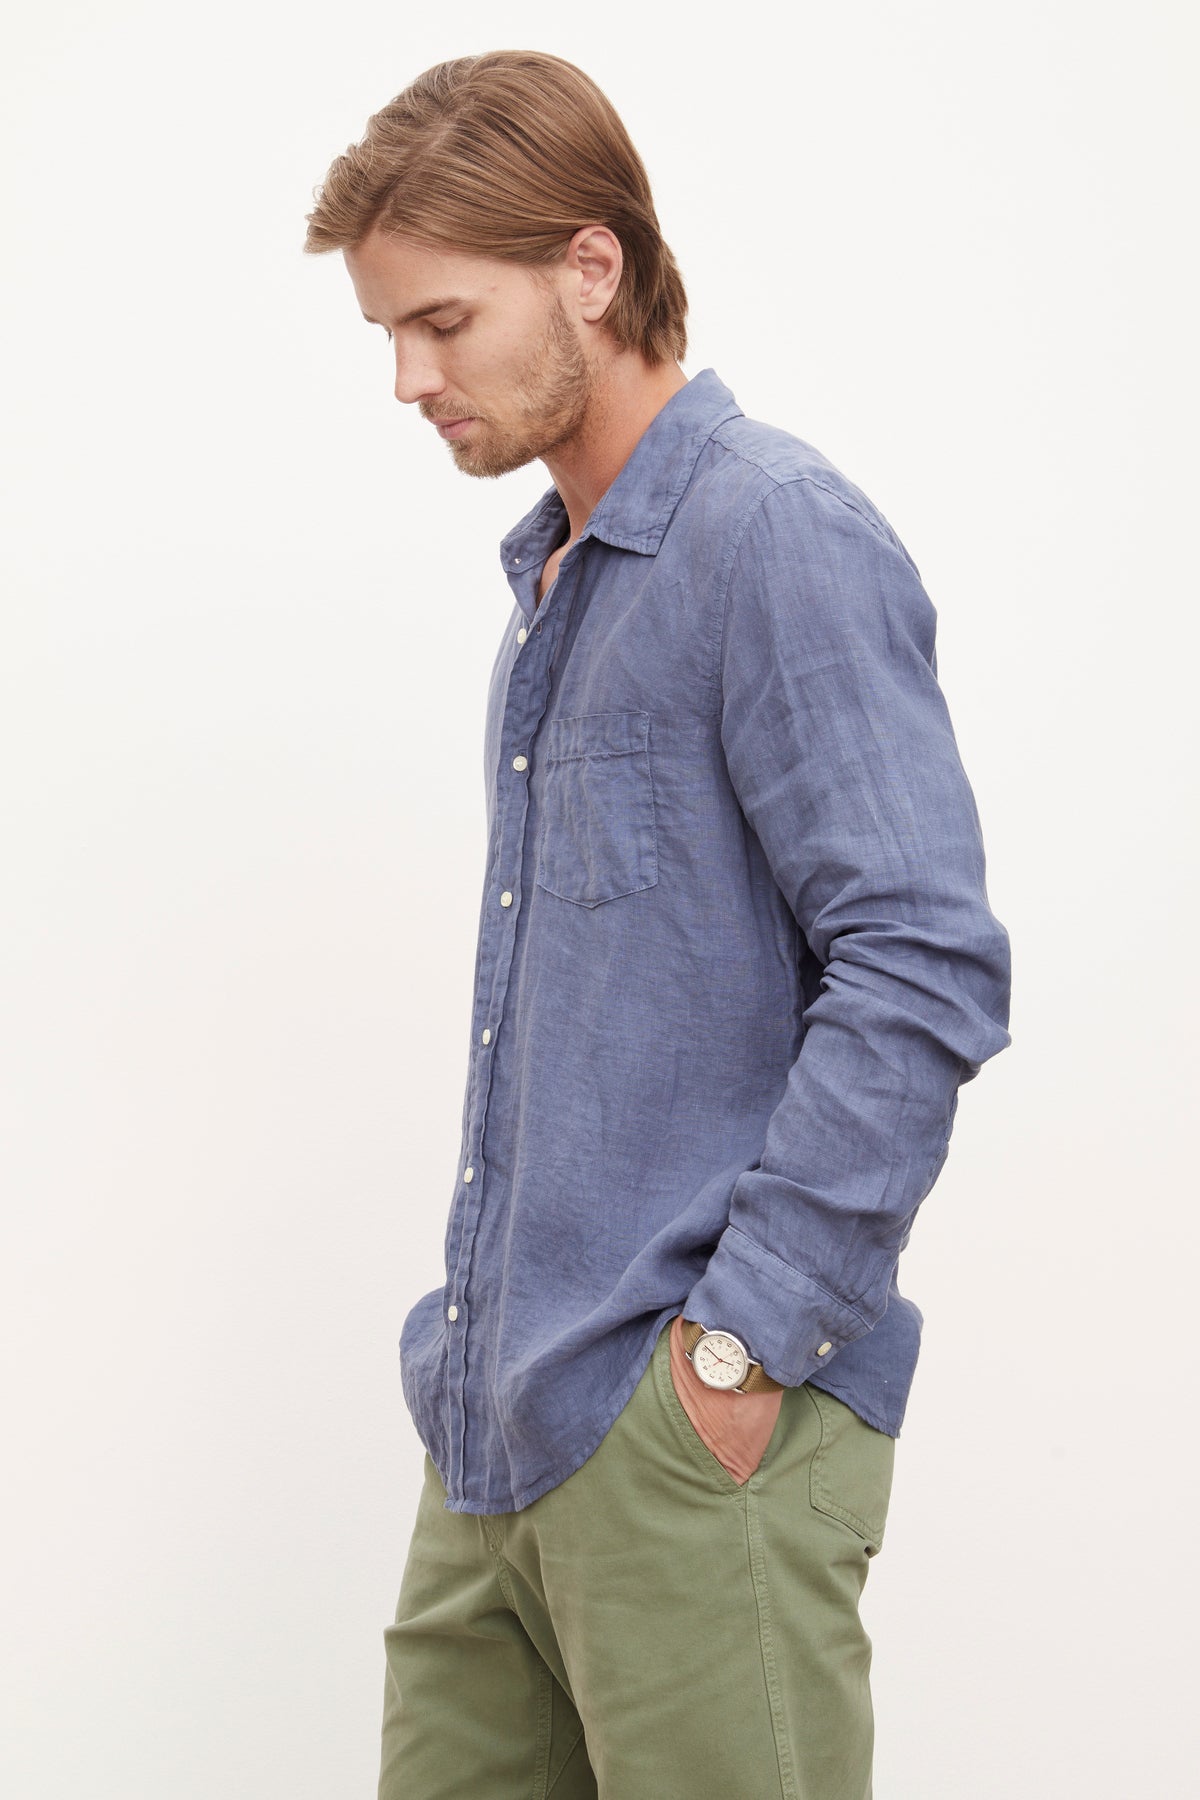 A man wearing a stylish Velvet by Graham & Spencer BENTON LINEN BUTTON-UP SHIRT and green pants.-36009360621761